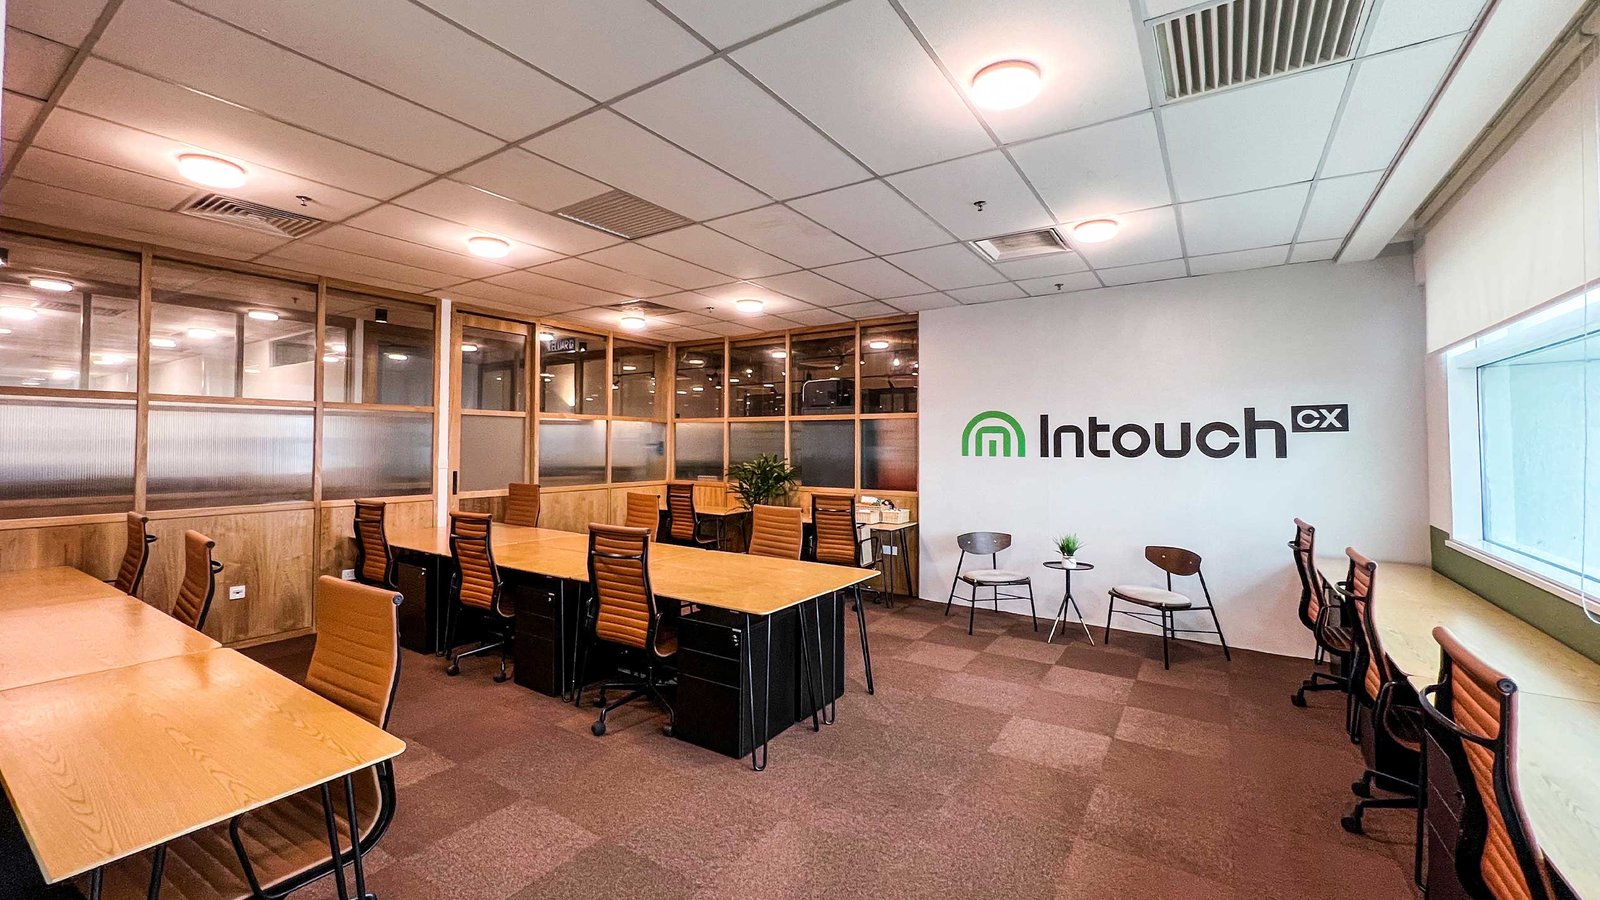 Walk-in Drive at Intouch CX